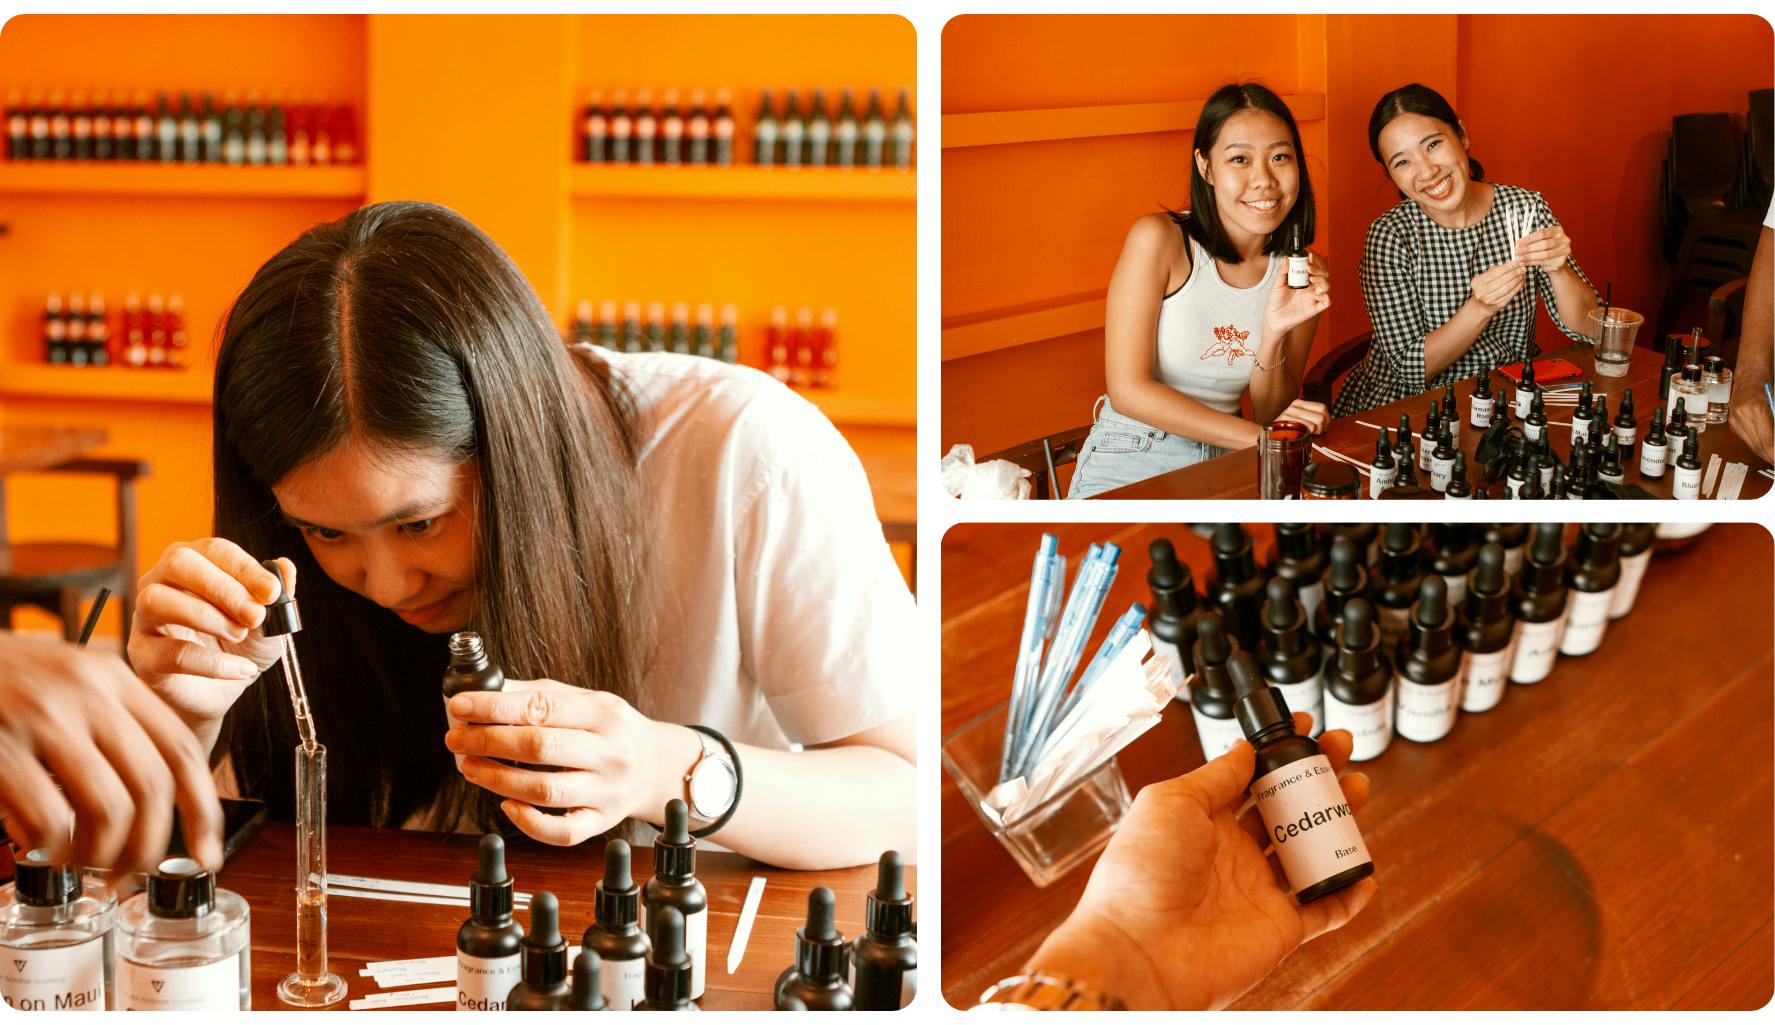 Mix and match essential oils with your team to create your own bespoke perfume!